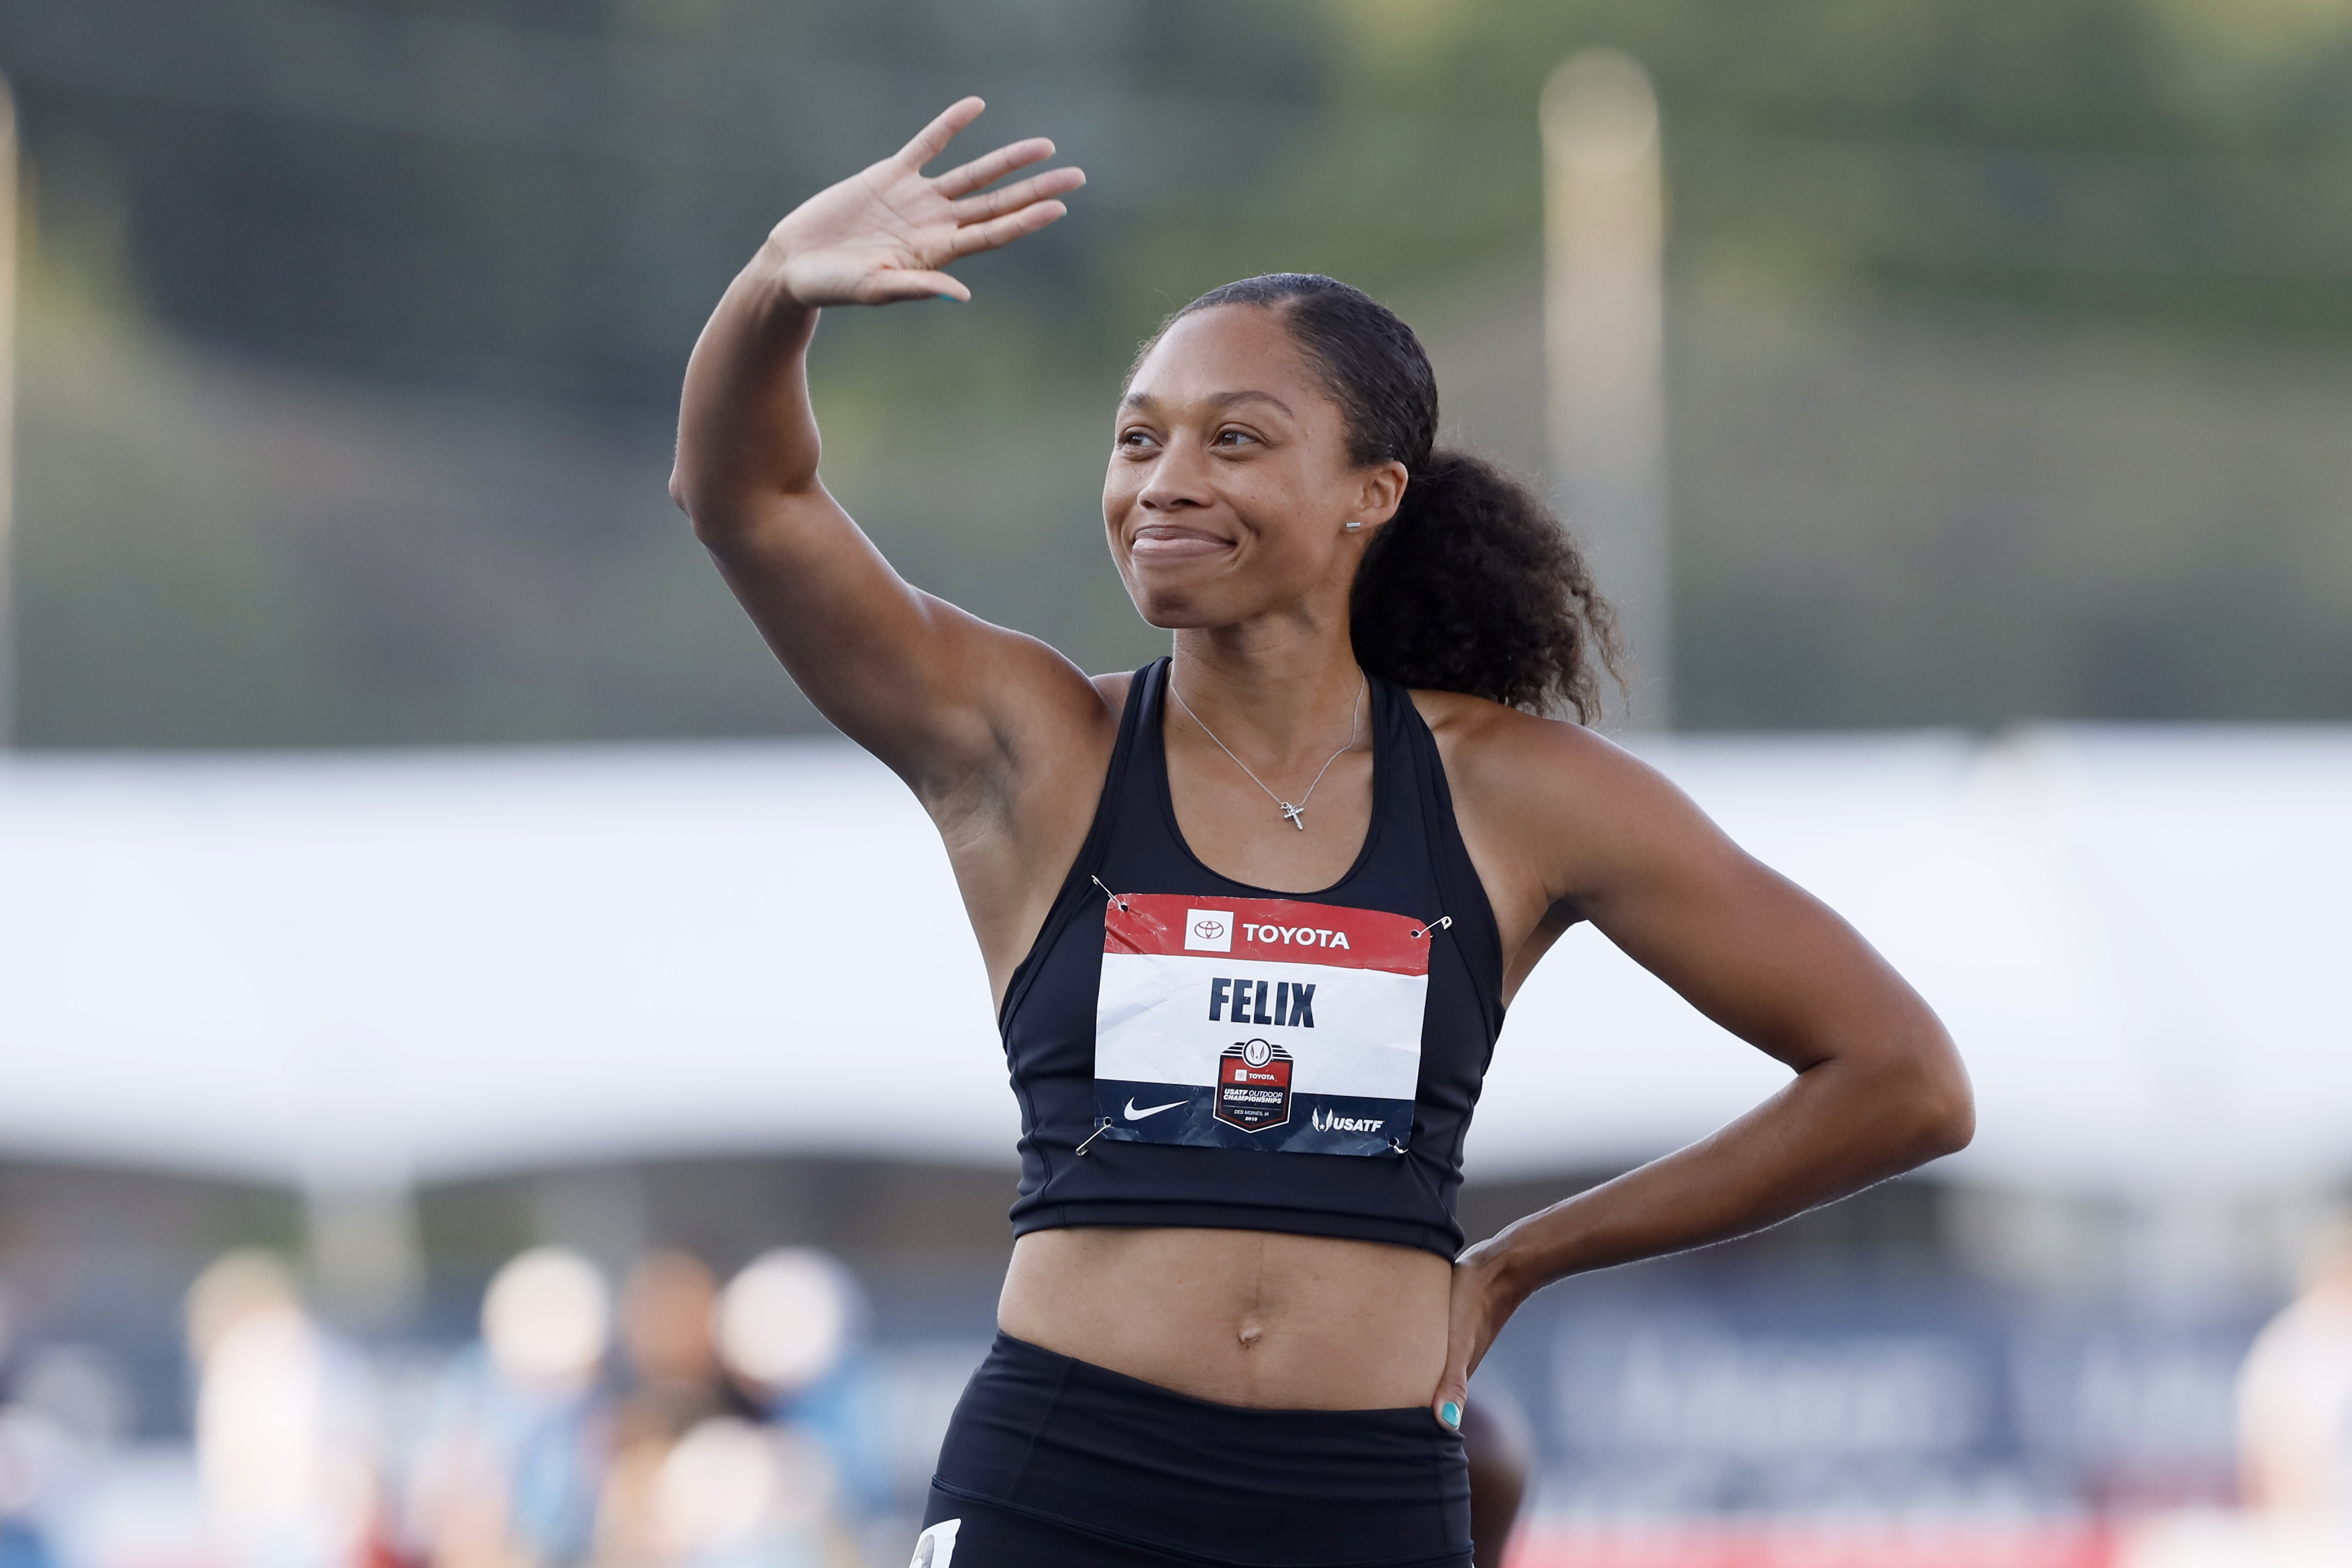 Felix continues to race competitively during her final athletics season